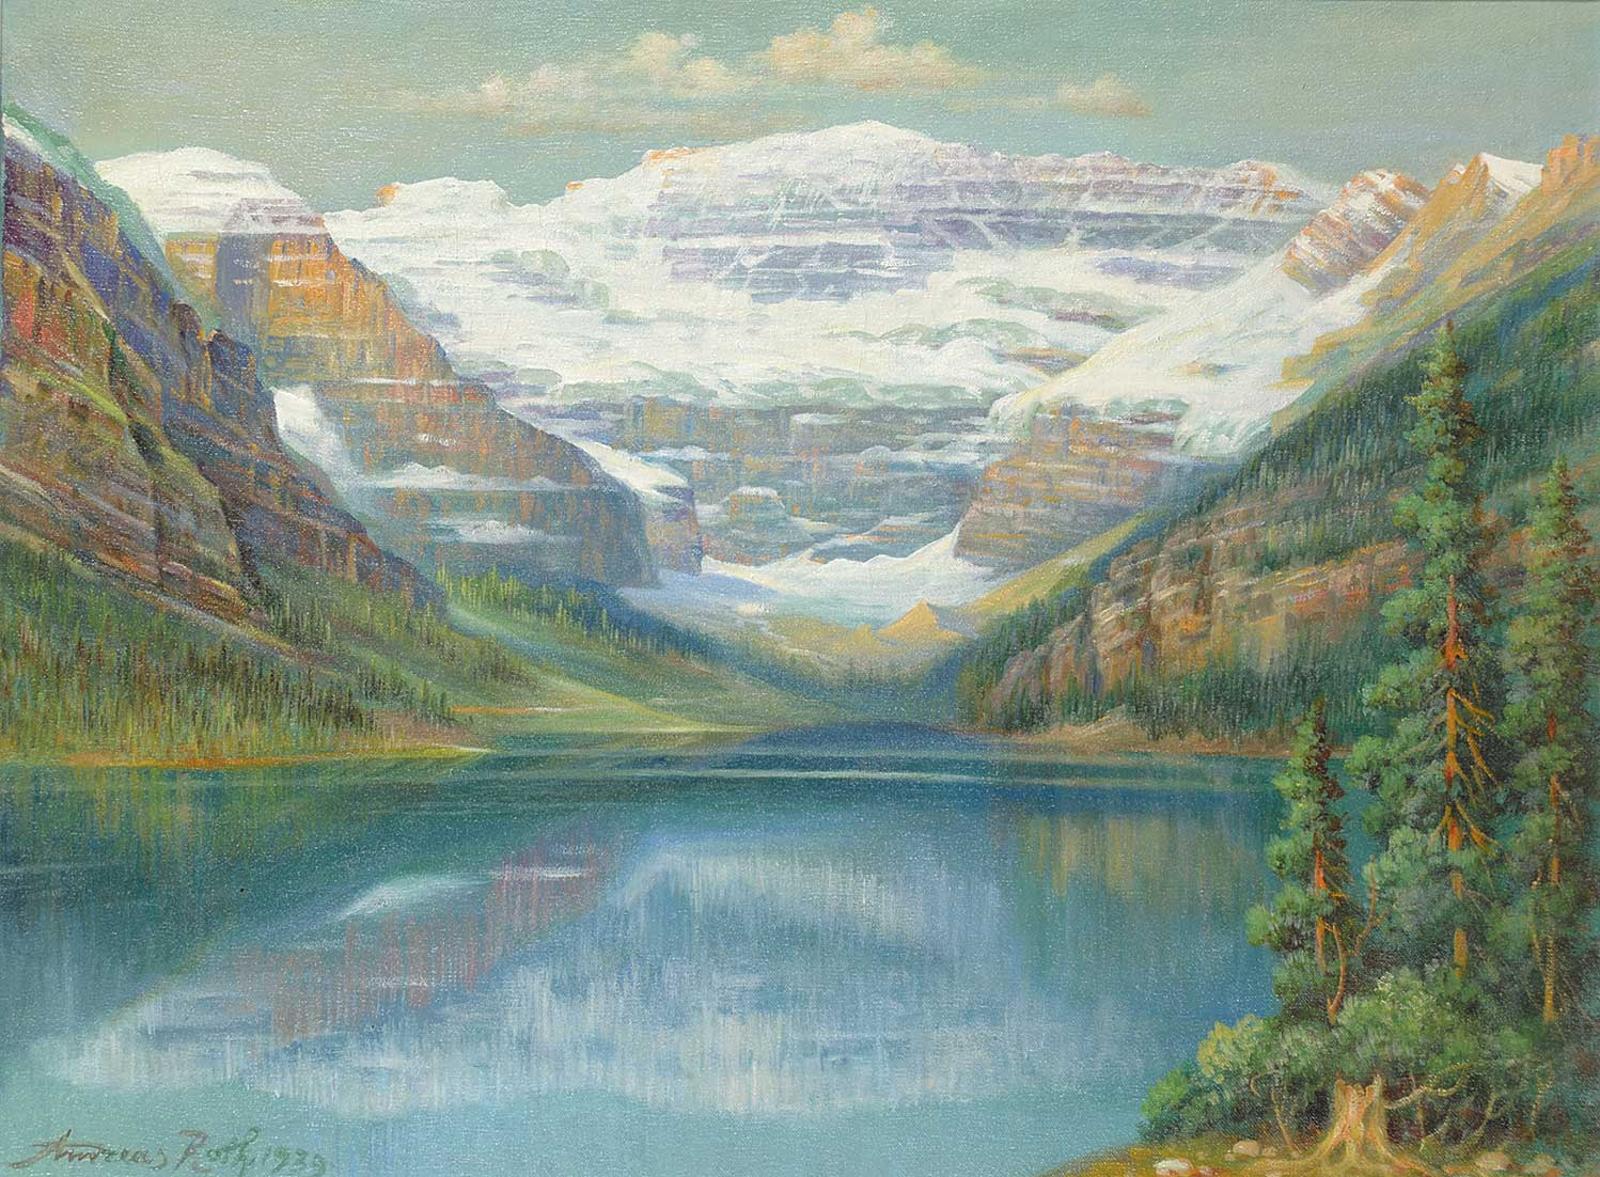 Andreas Roth (1872-1949) - Untitled - Lake Louise